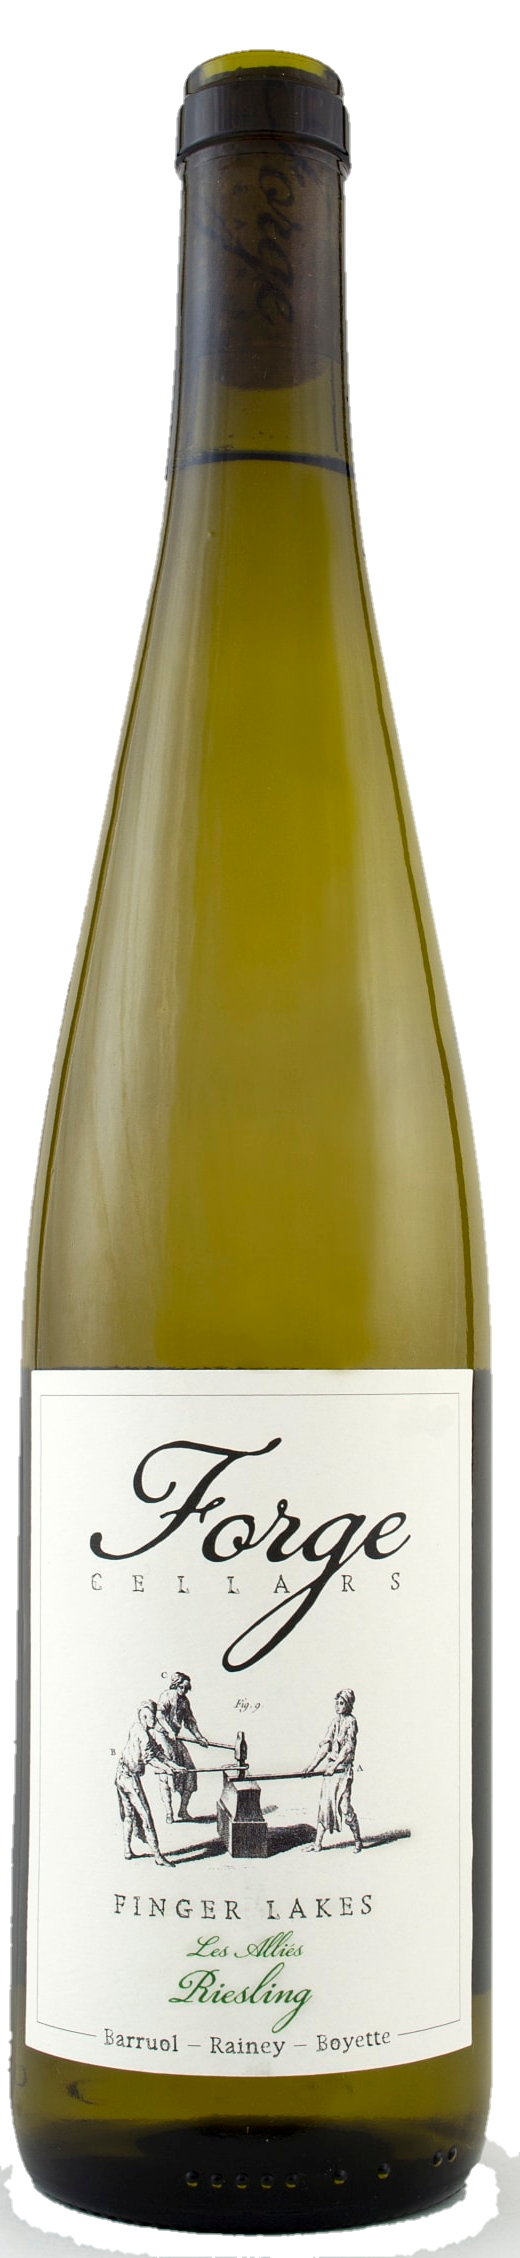 Forge Cellars Riesling Les Allies 2016